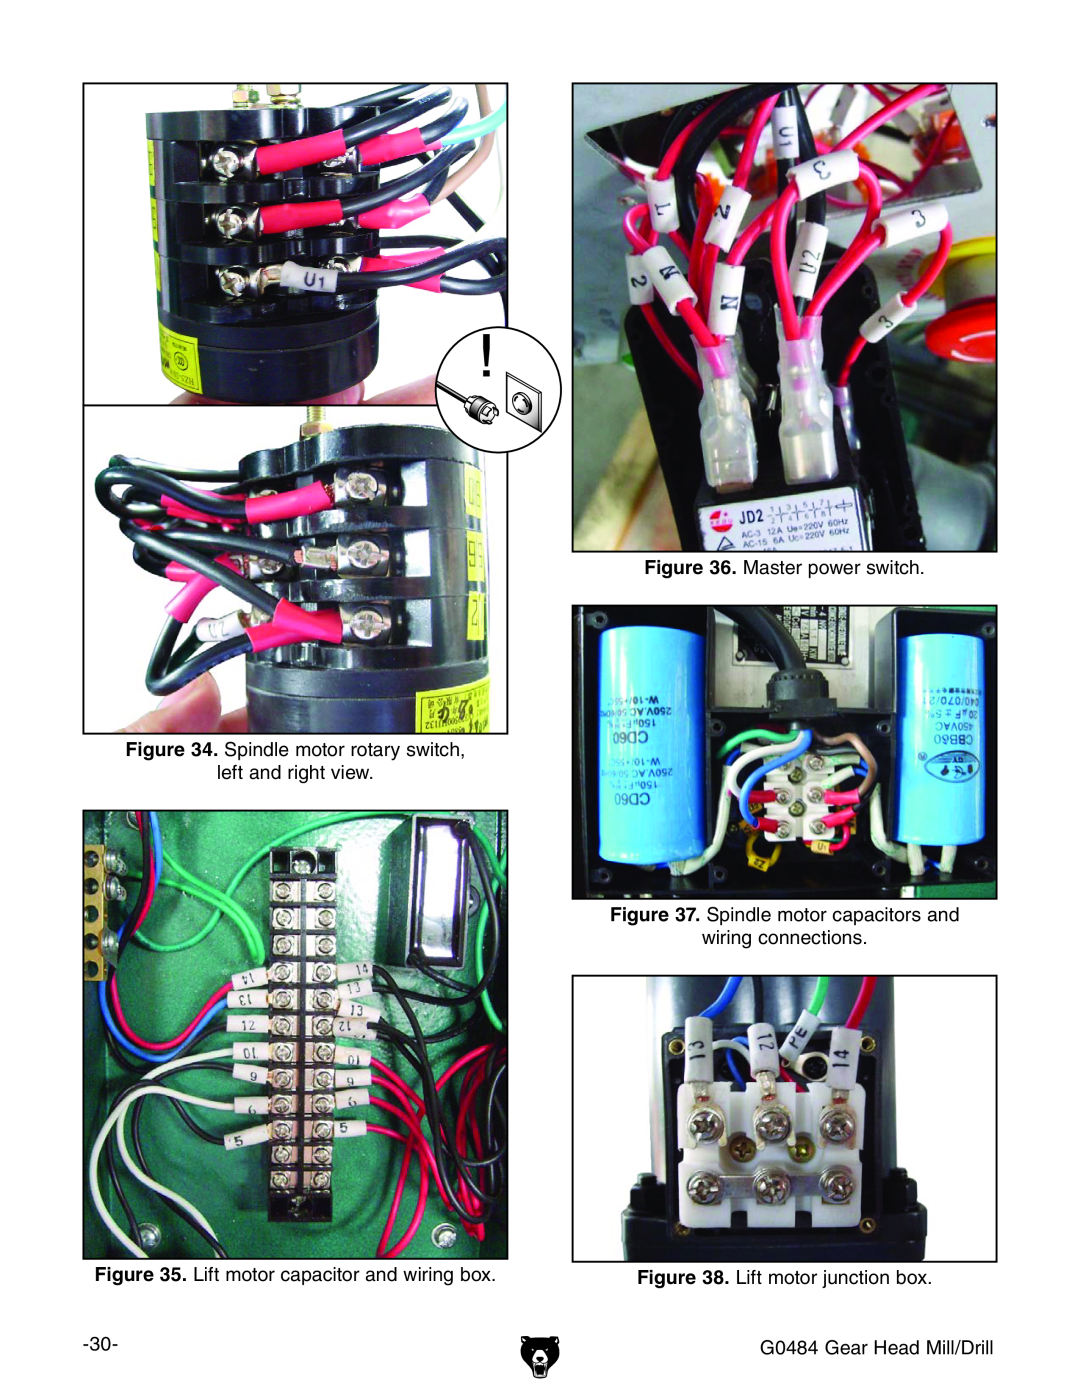 Grizzly G0484 Spindle motor rotary switch left and right view, Lift motor capacitor and wiring box, Master power switch 